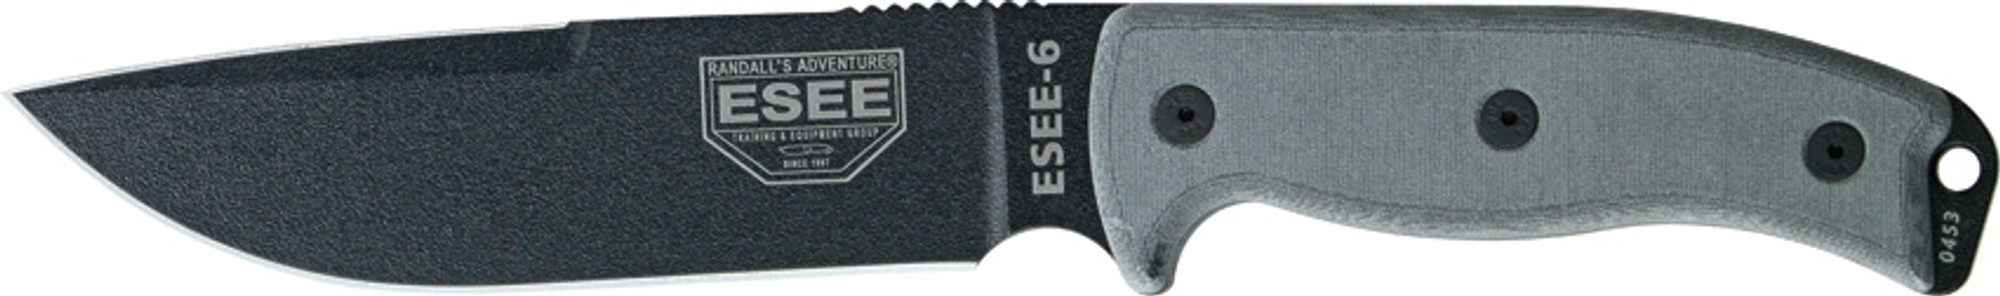 ESEE 6S-CP-OD Clip Point with Serration, OD Sheath